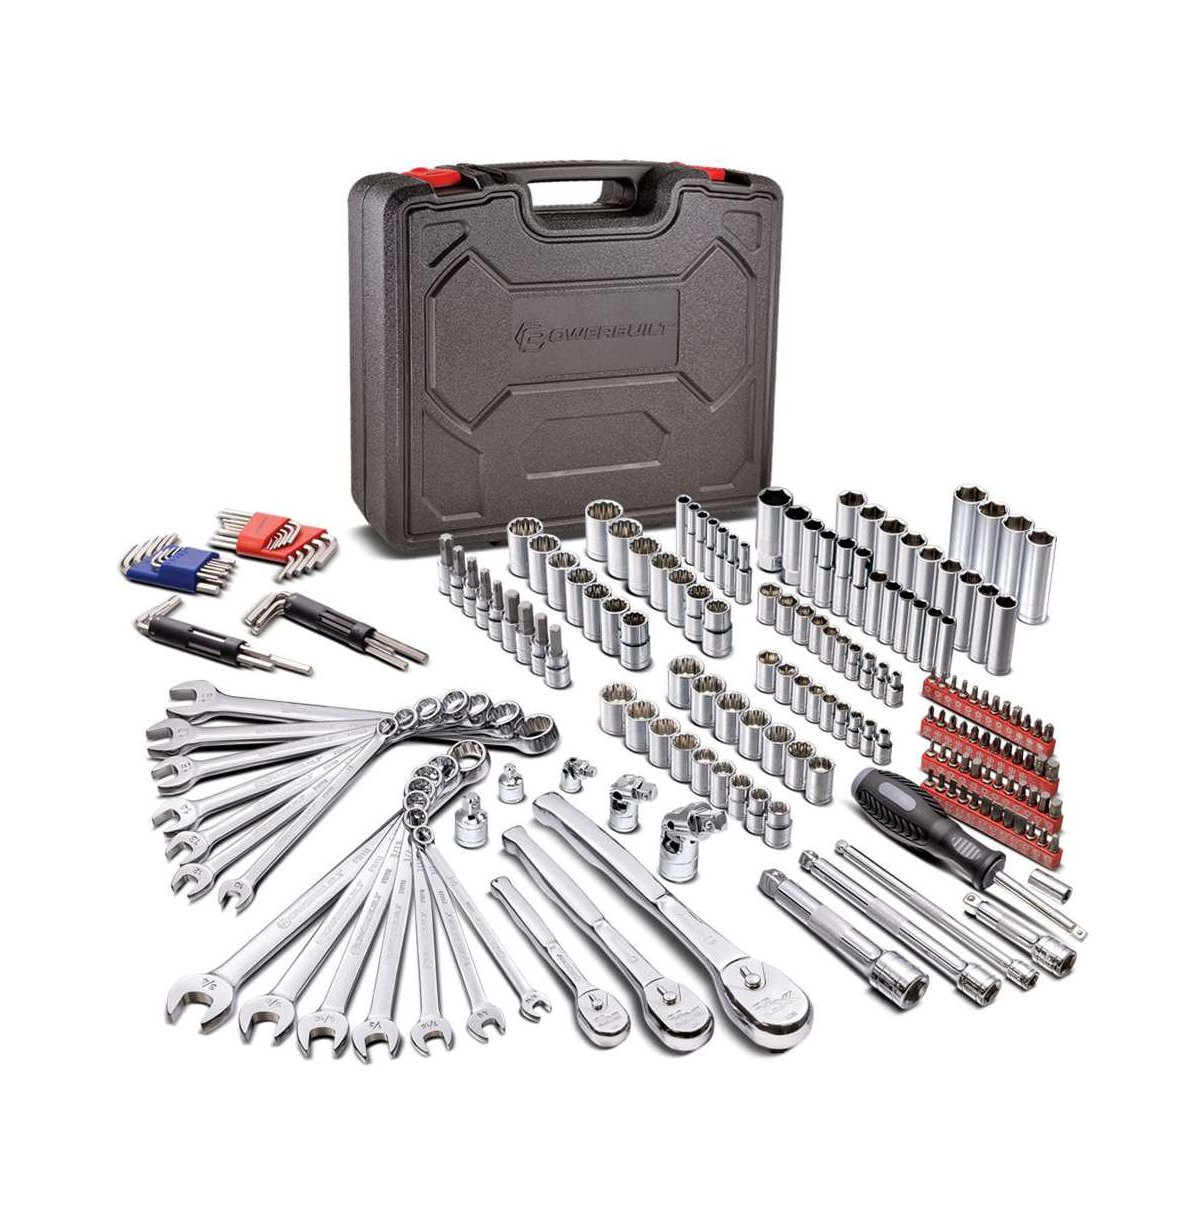 200 Piece Master Tool Set with Sockets, Ratchets, and Wrenches - Silver